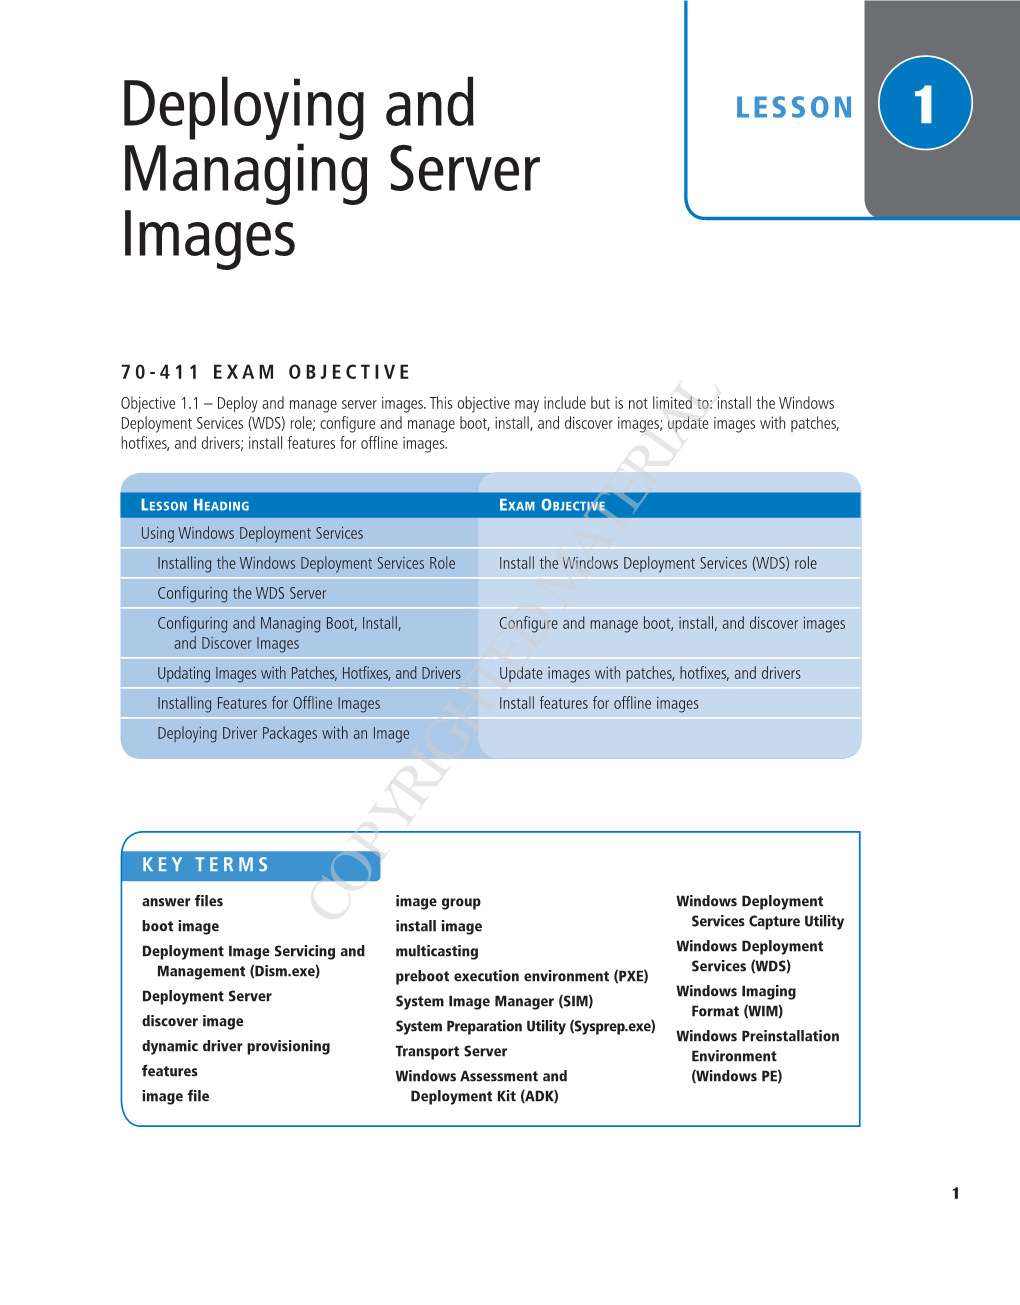 Deploying and Managing Server Images | 3